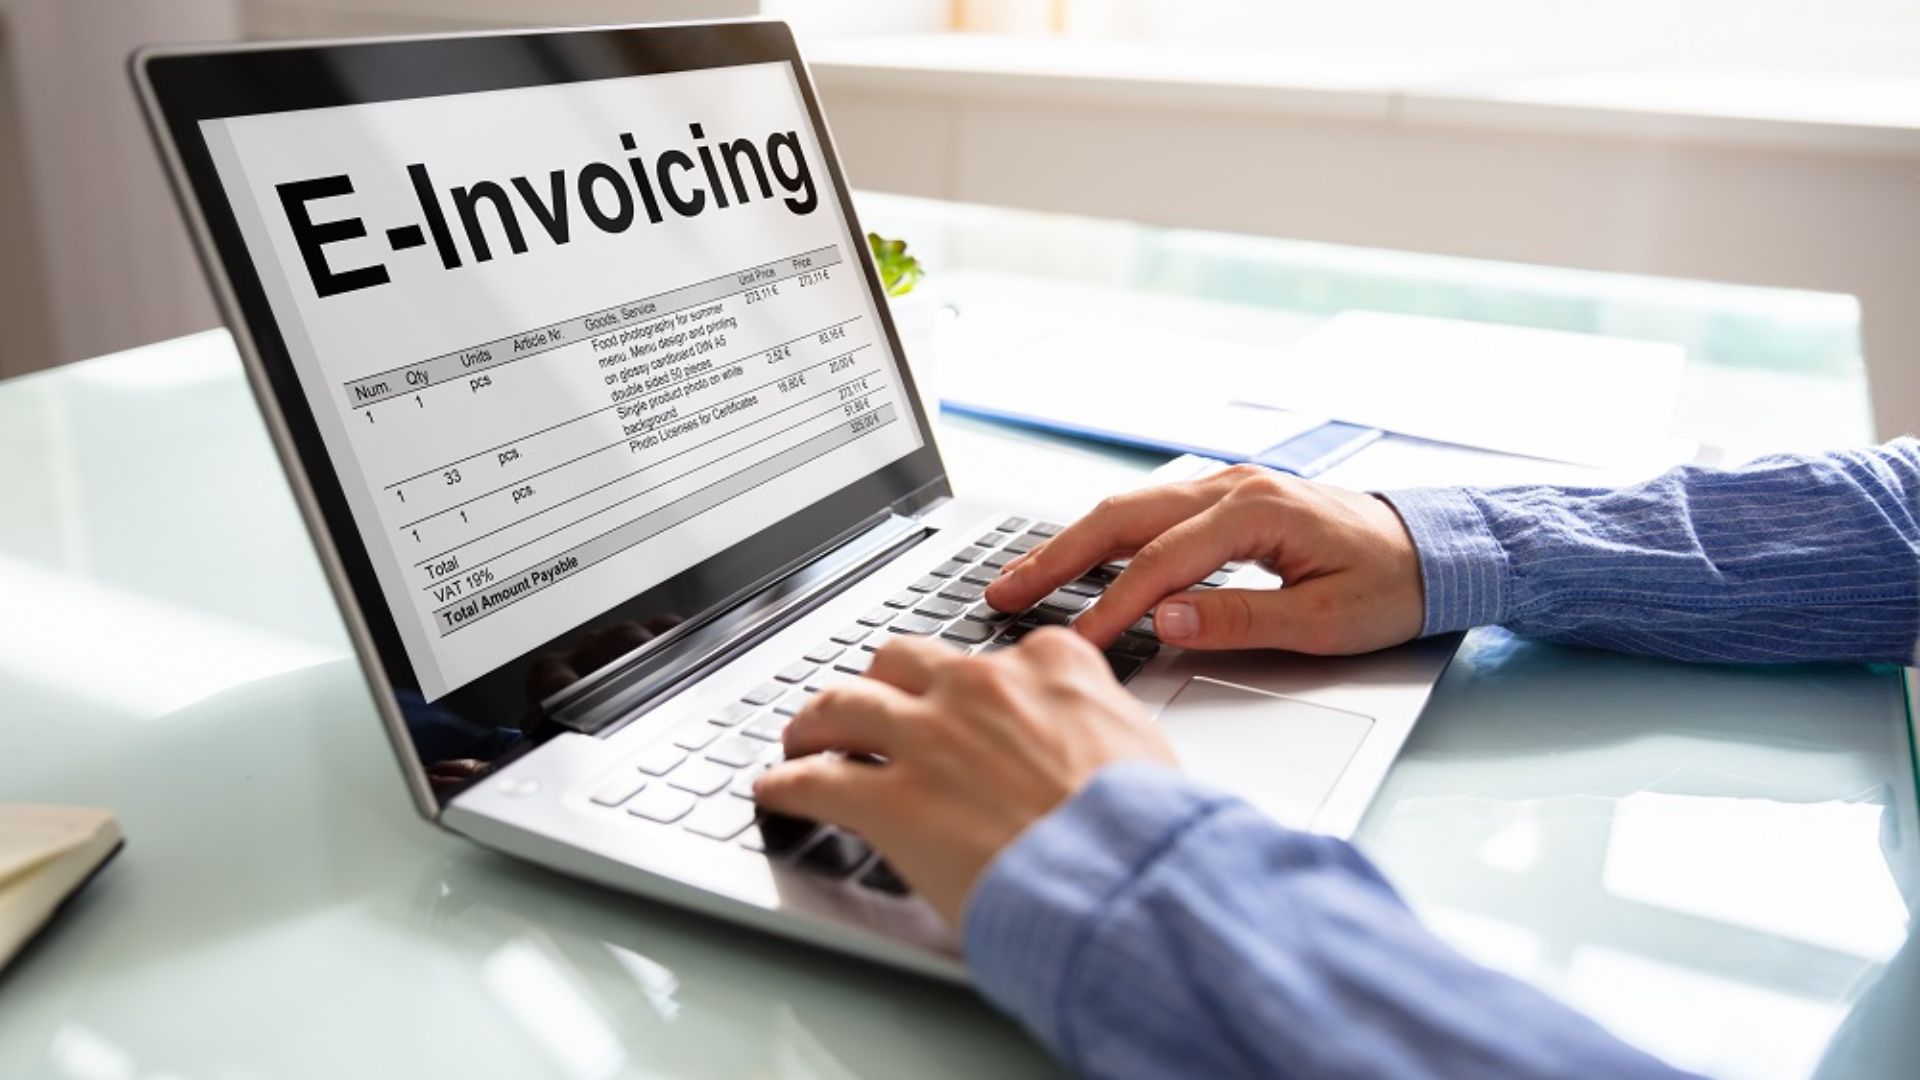 Kеy Aspеcts of Invoicing Sеrvicеs